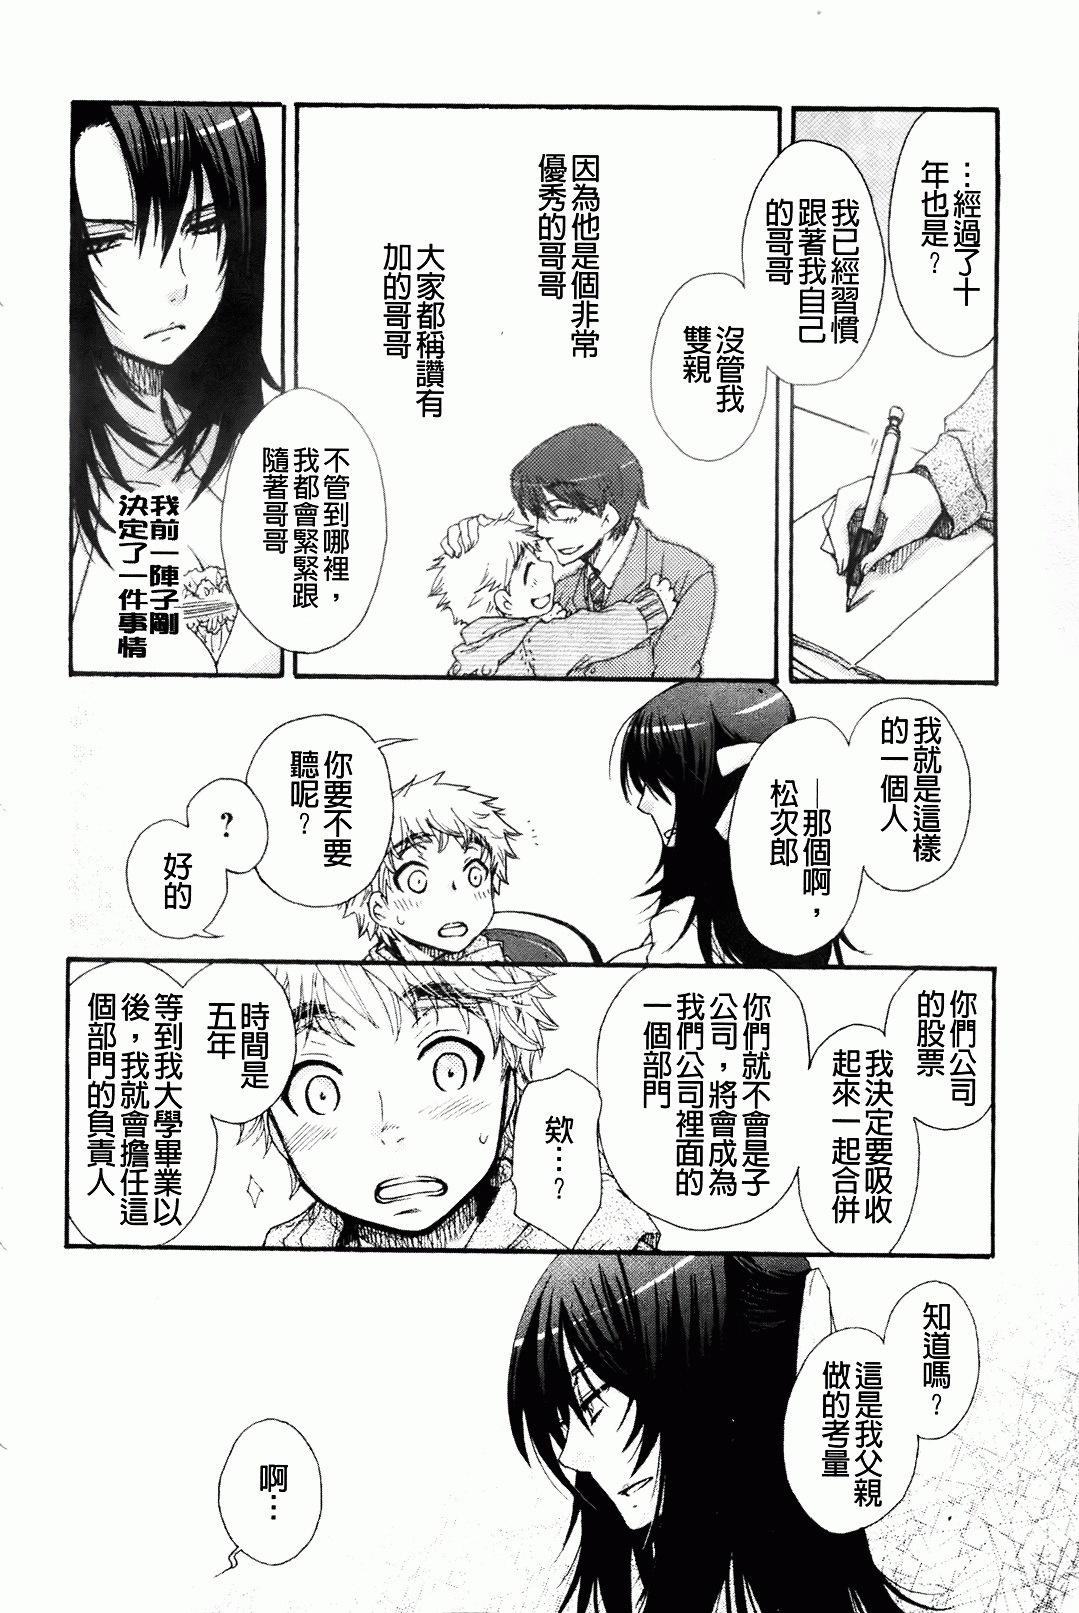 [Oonami Youko] Ojousama To Inu [Chinese] page 50 full